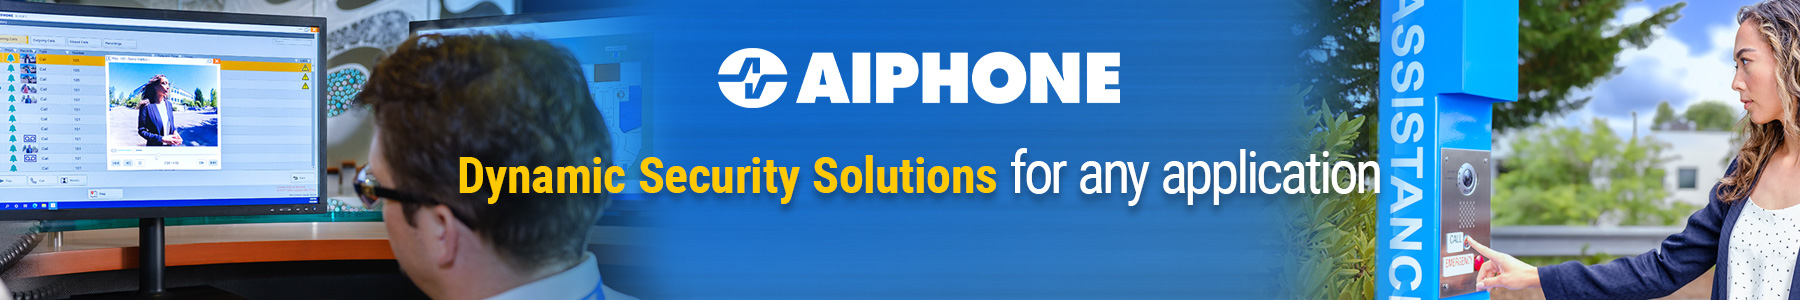 aiphonead-version1_jm_10-22_1800x300-updated